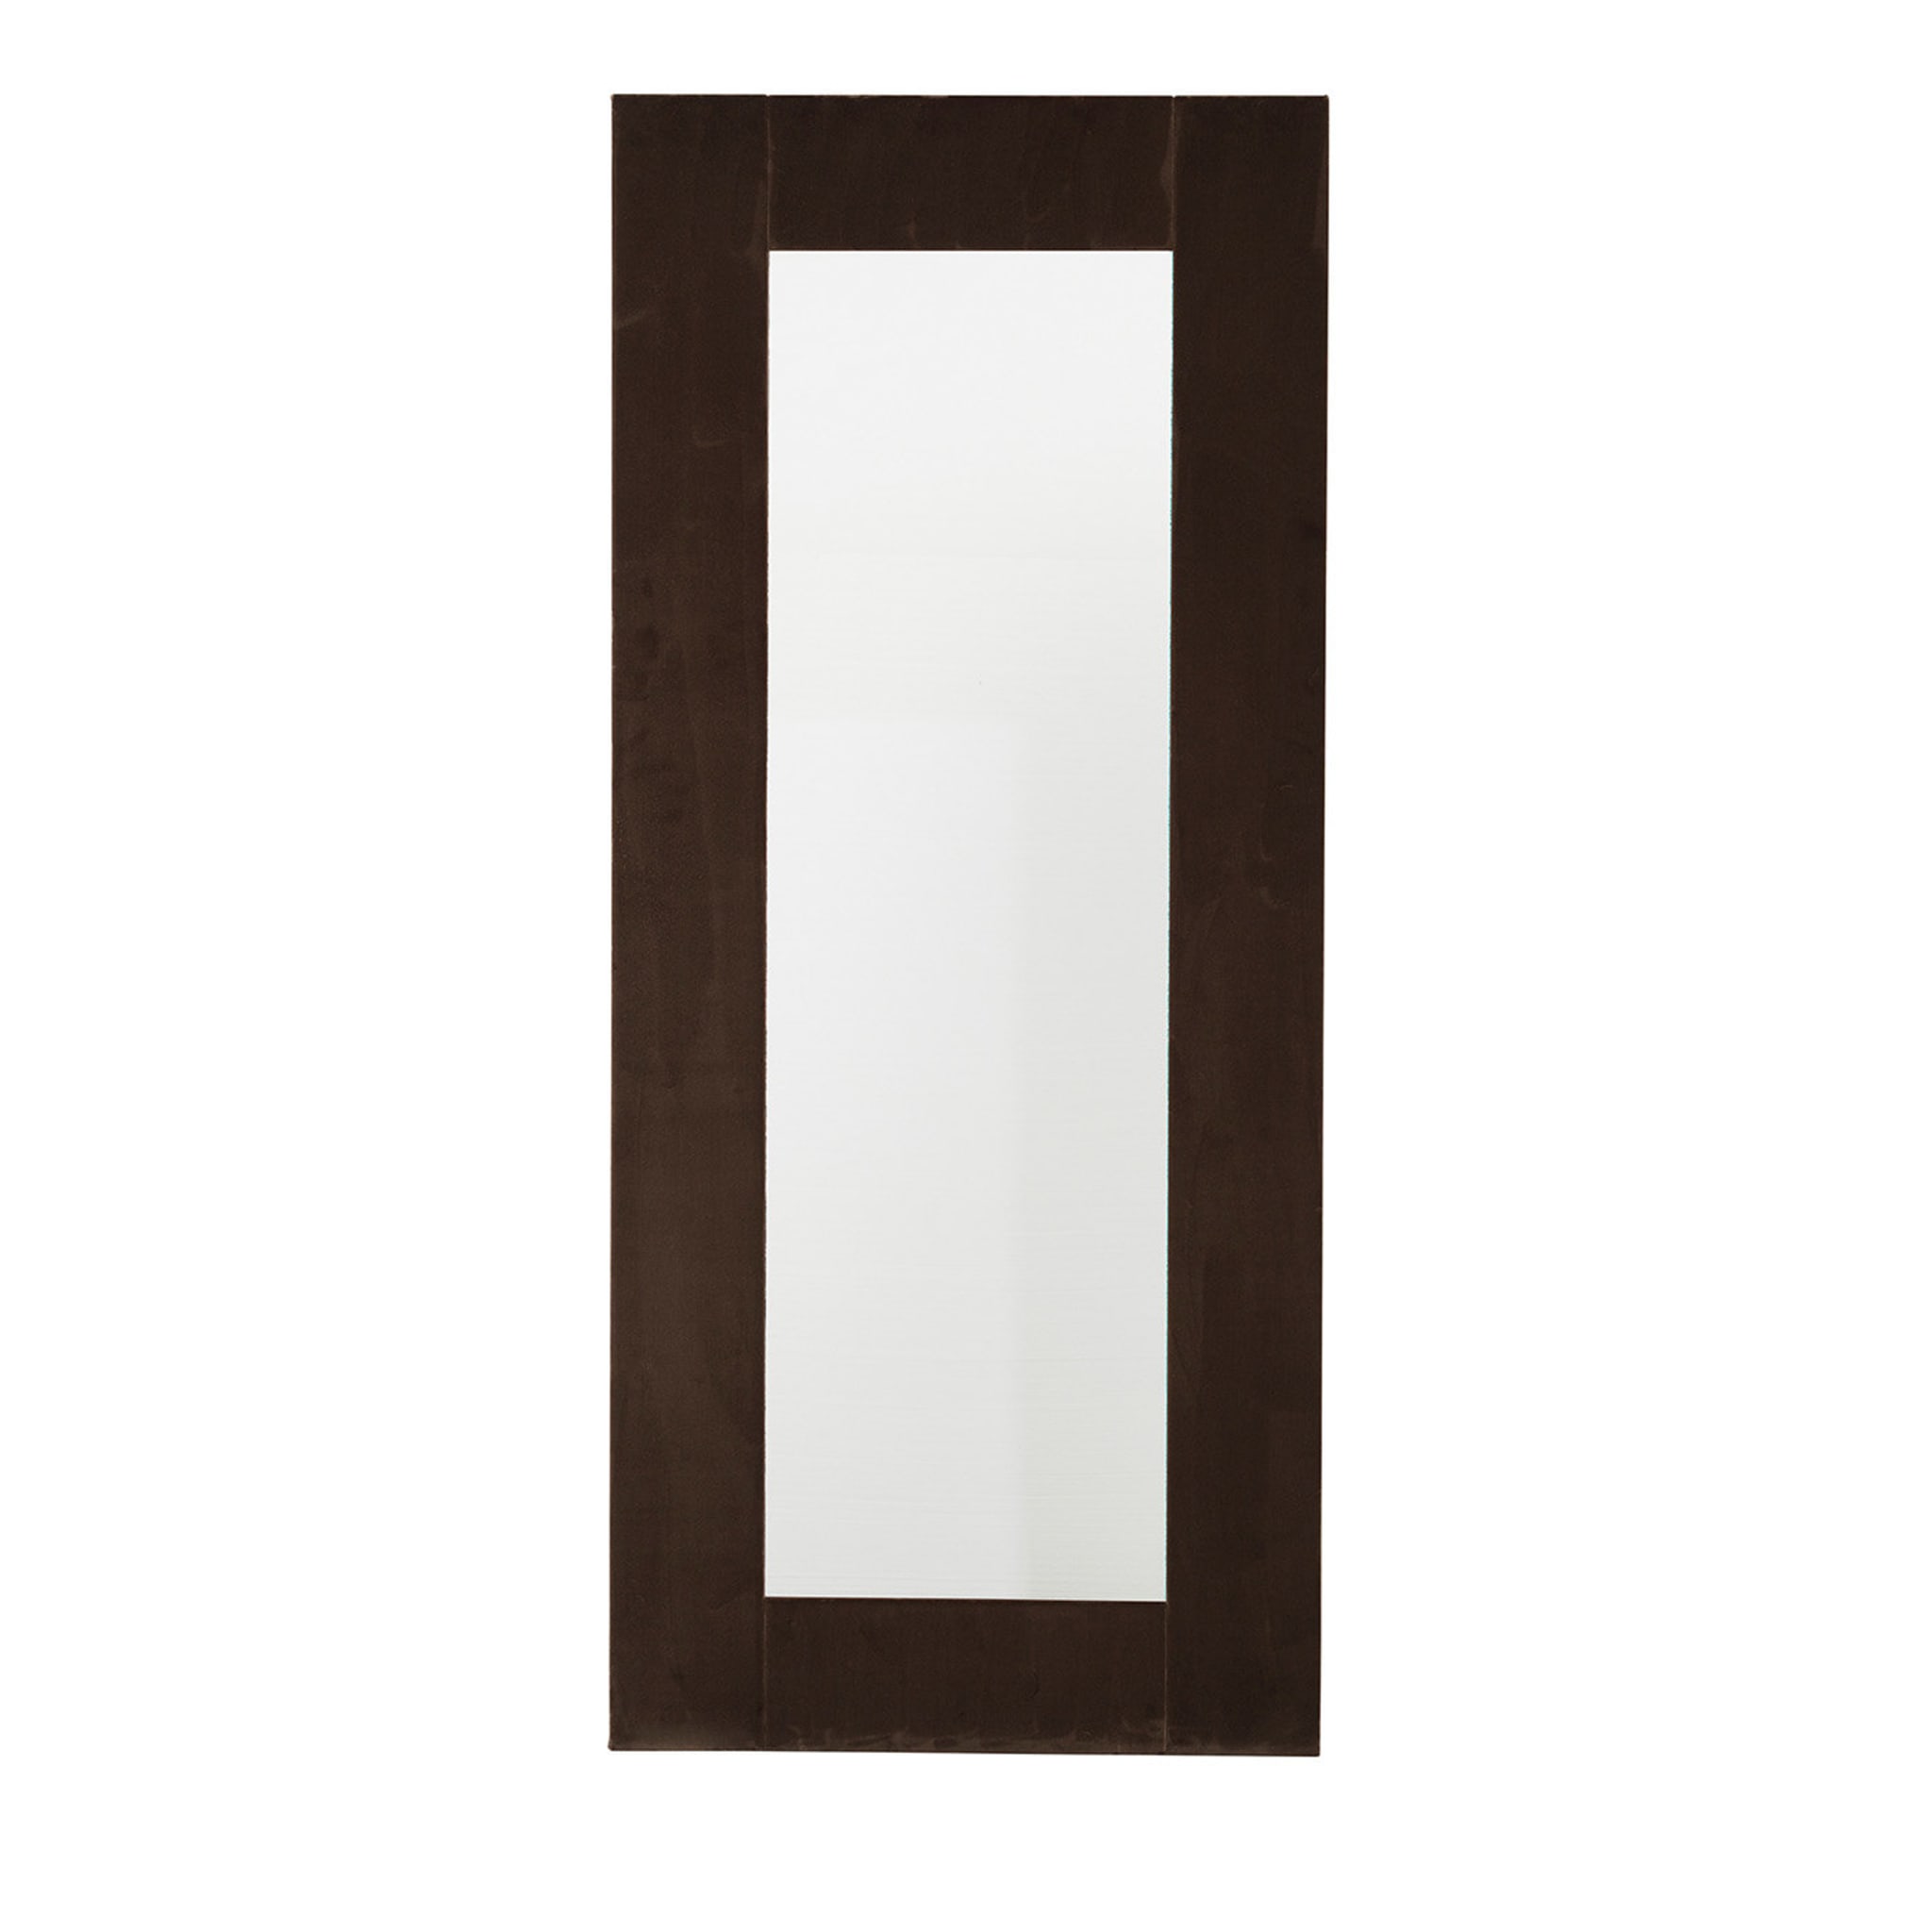 Adriano Brown Full-Lenght Mirror by Ciarmoli Queda Studio - Main view